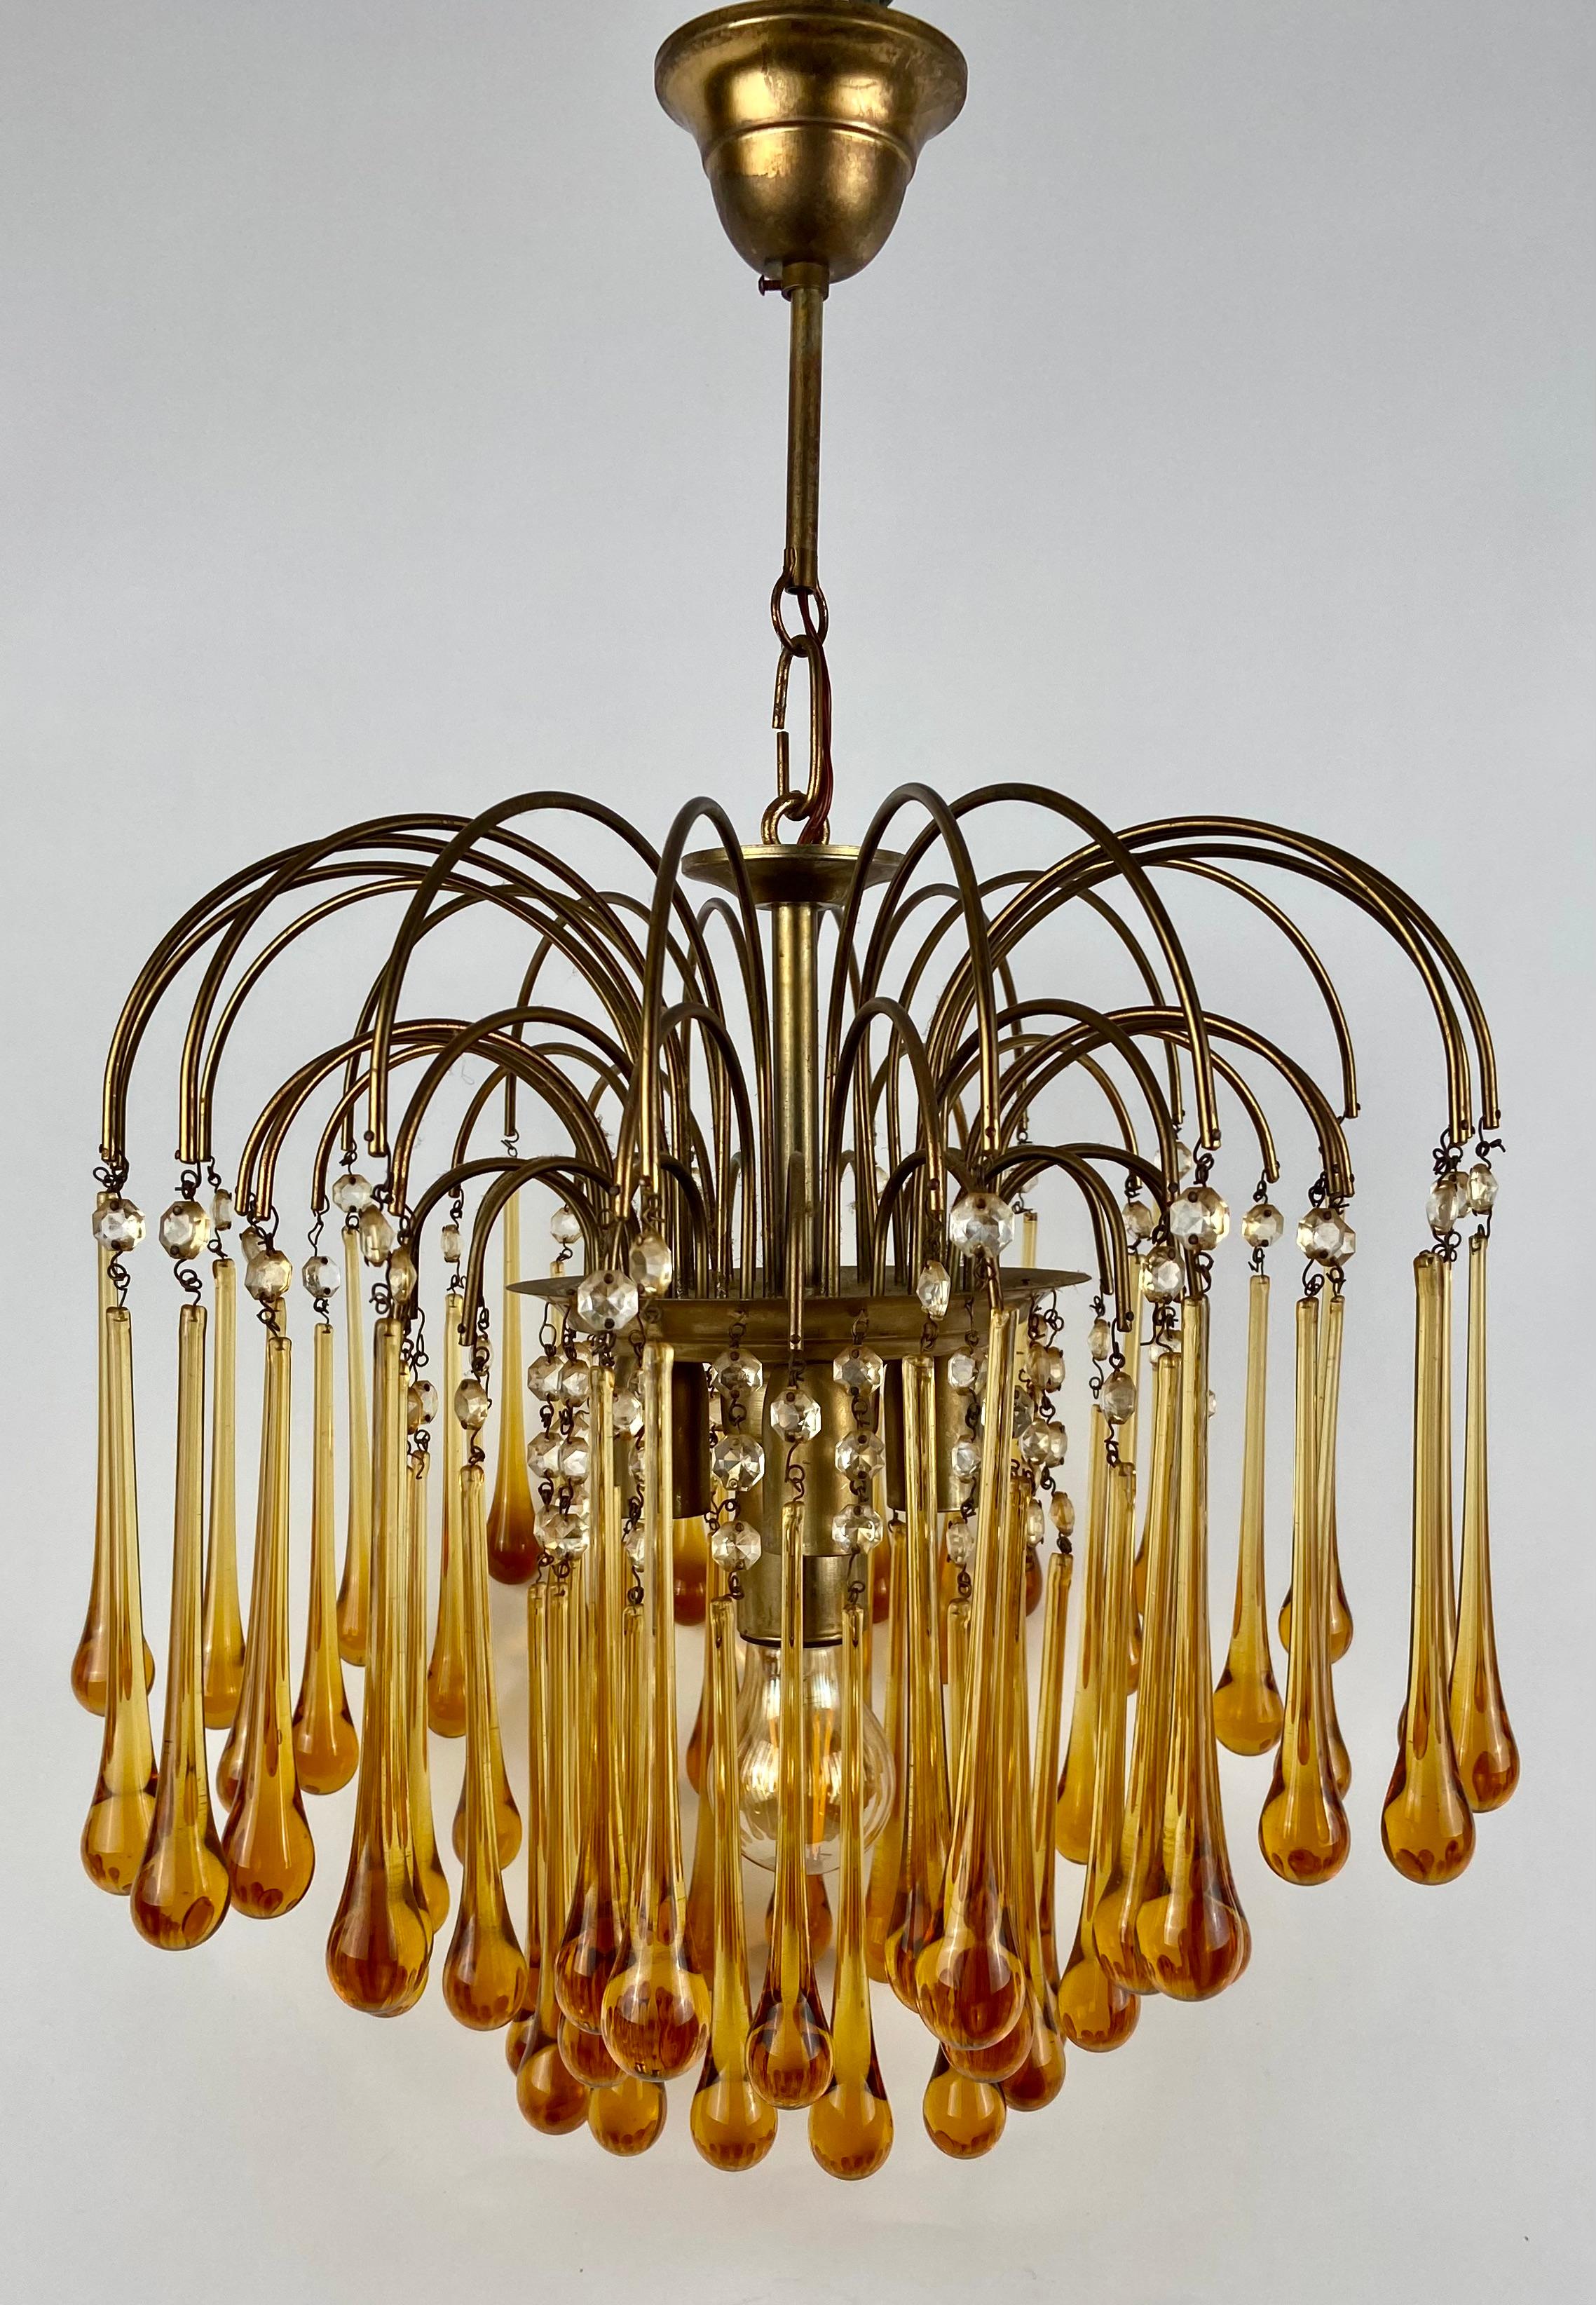 Ceiling lamp with glass teardrops in the warm color cognac. 
The brass base holds 4 light bulbs. France, circa 1930. 